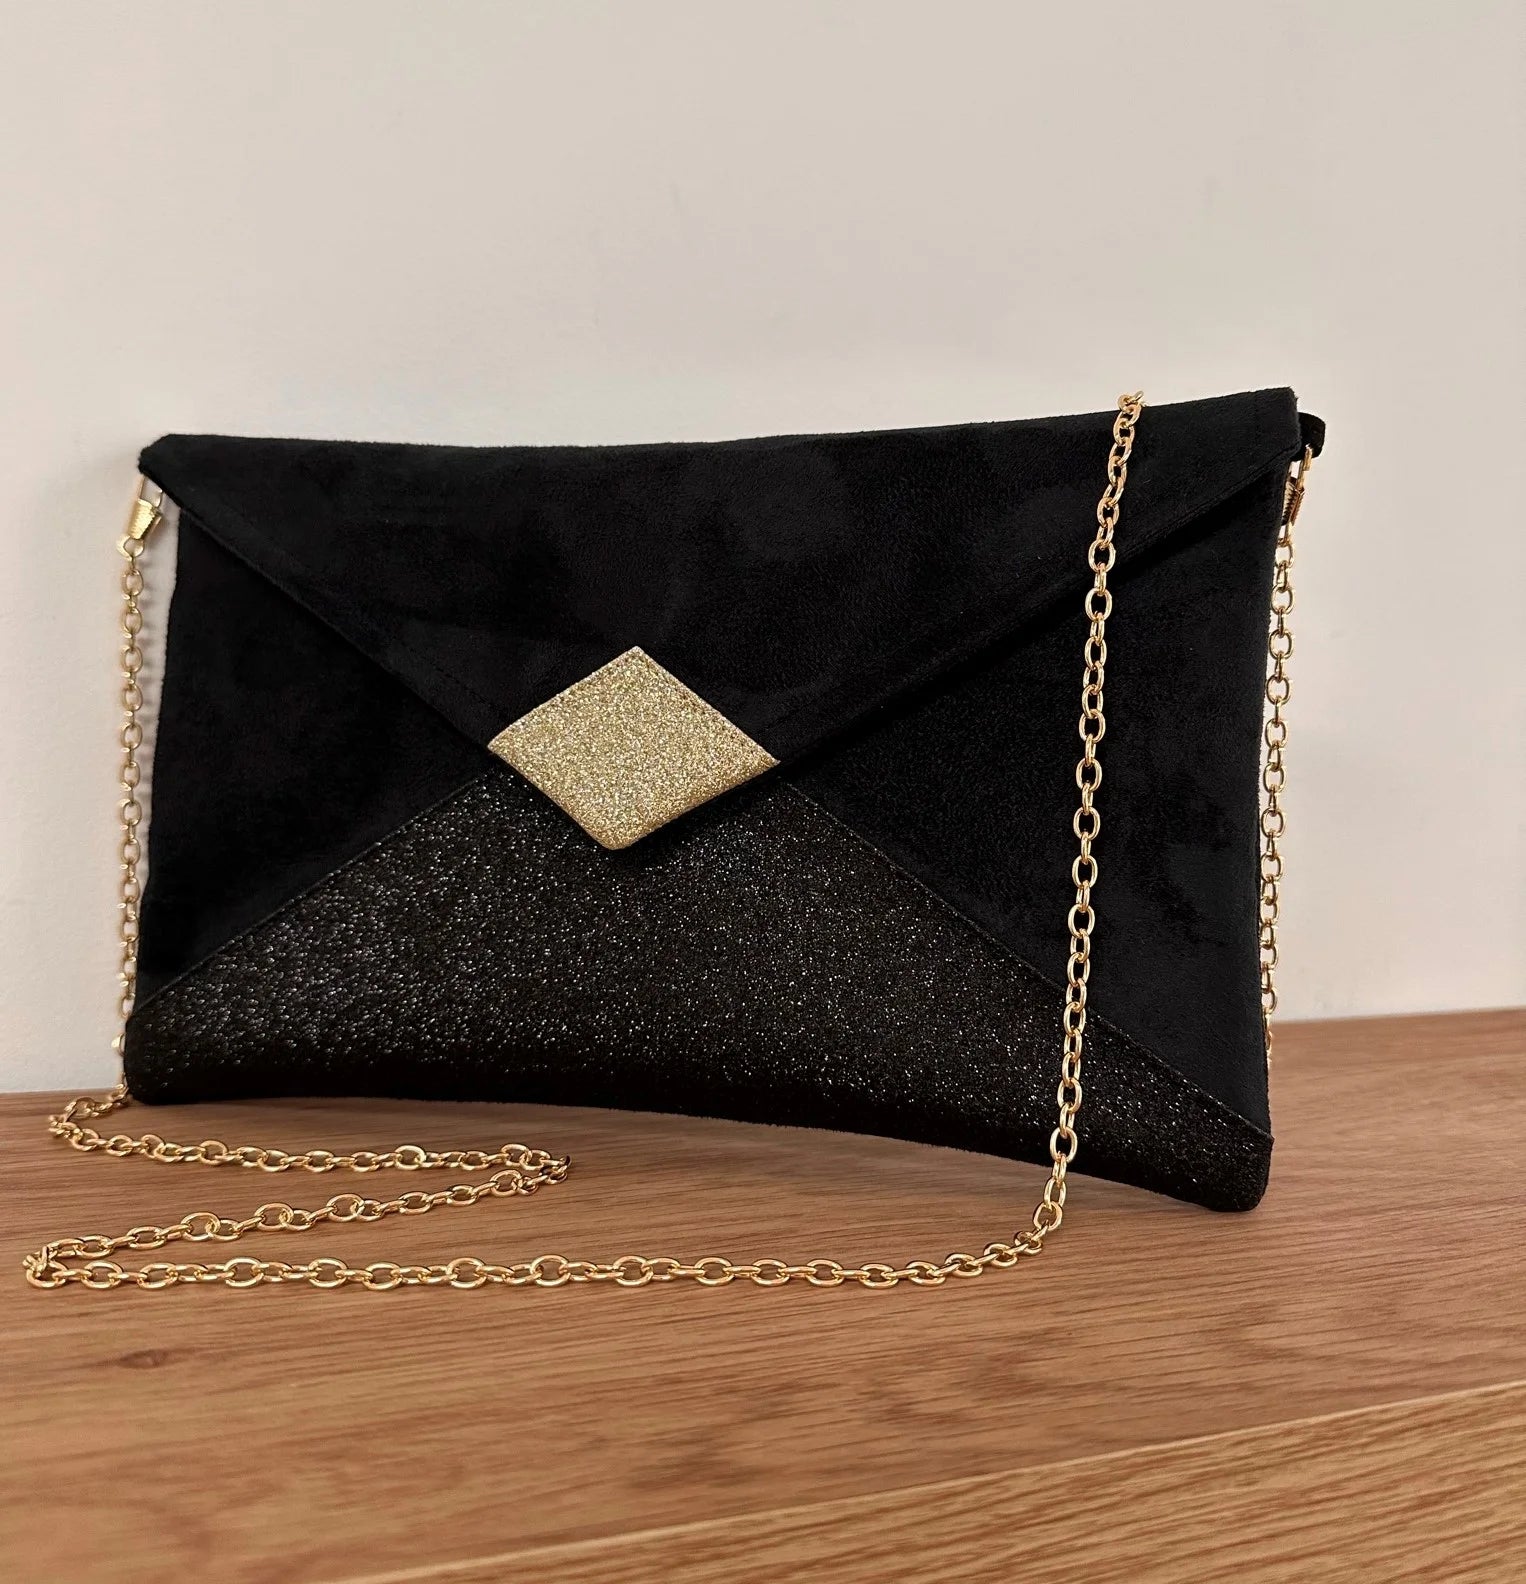 Black and Gold Isa Clutch Bag with Sequins⎪Lesfilsdisa